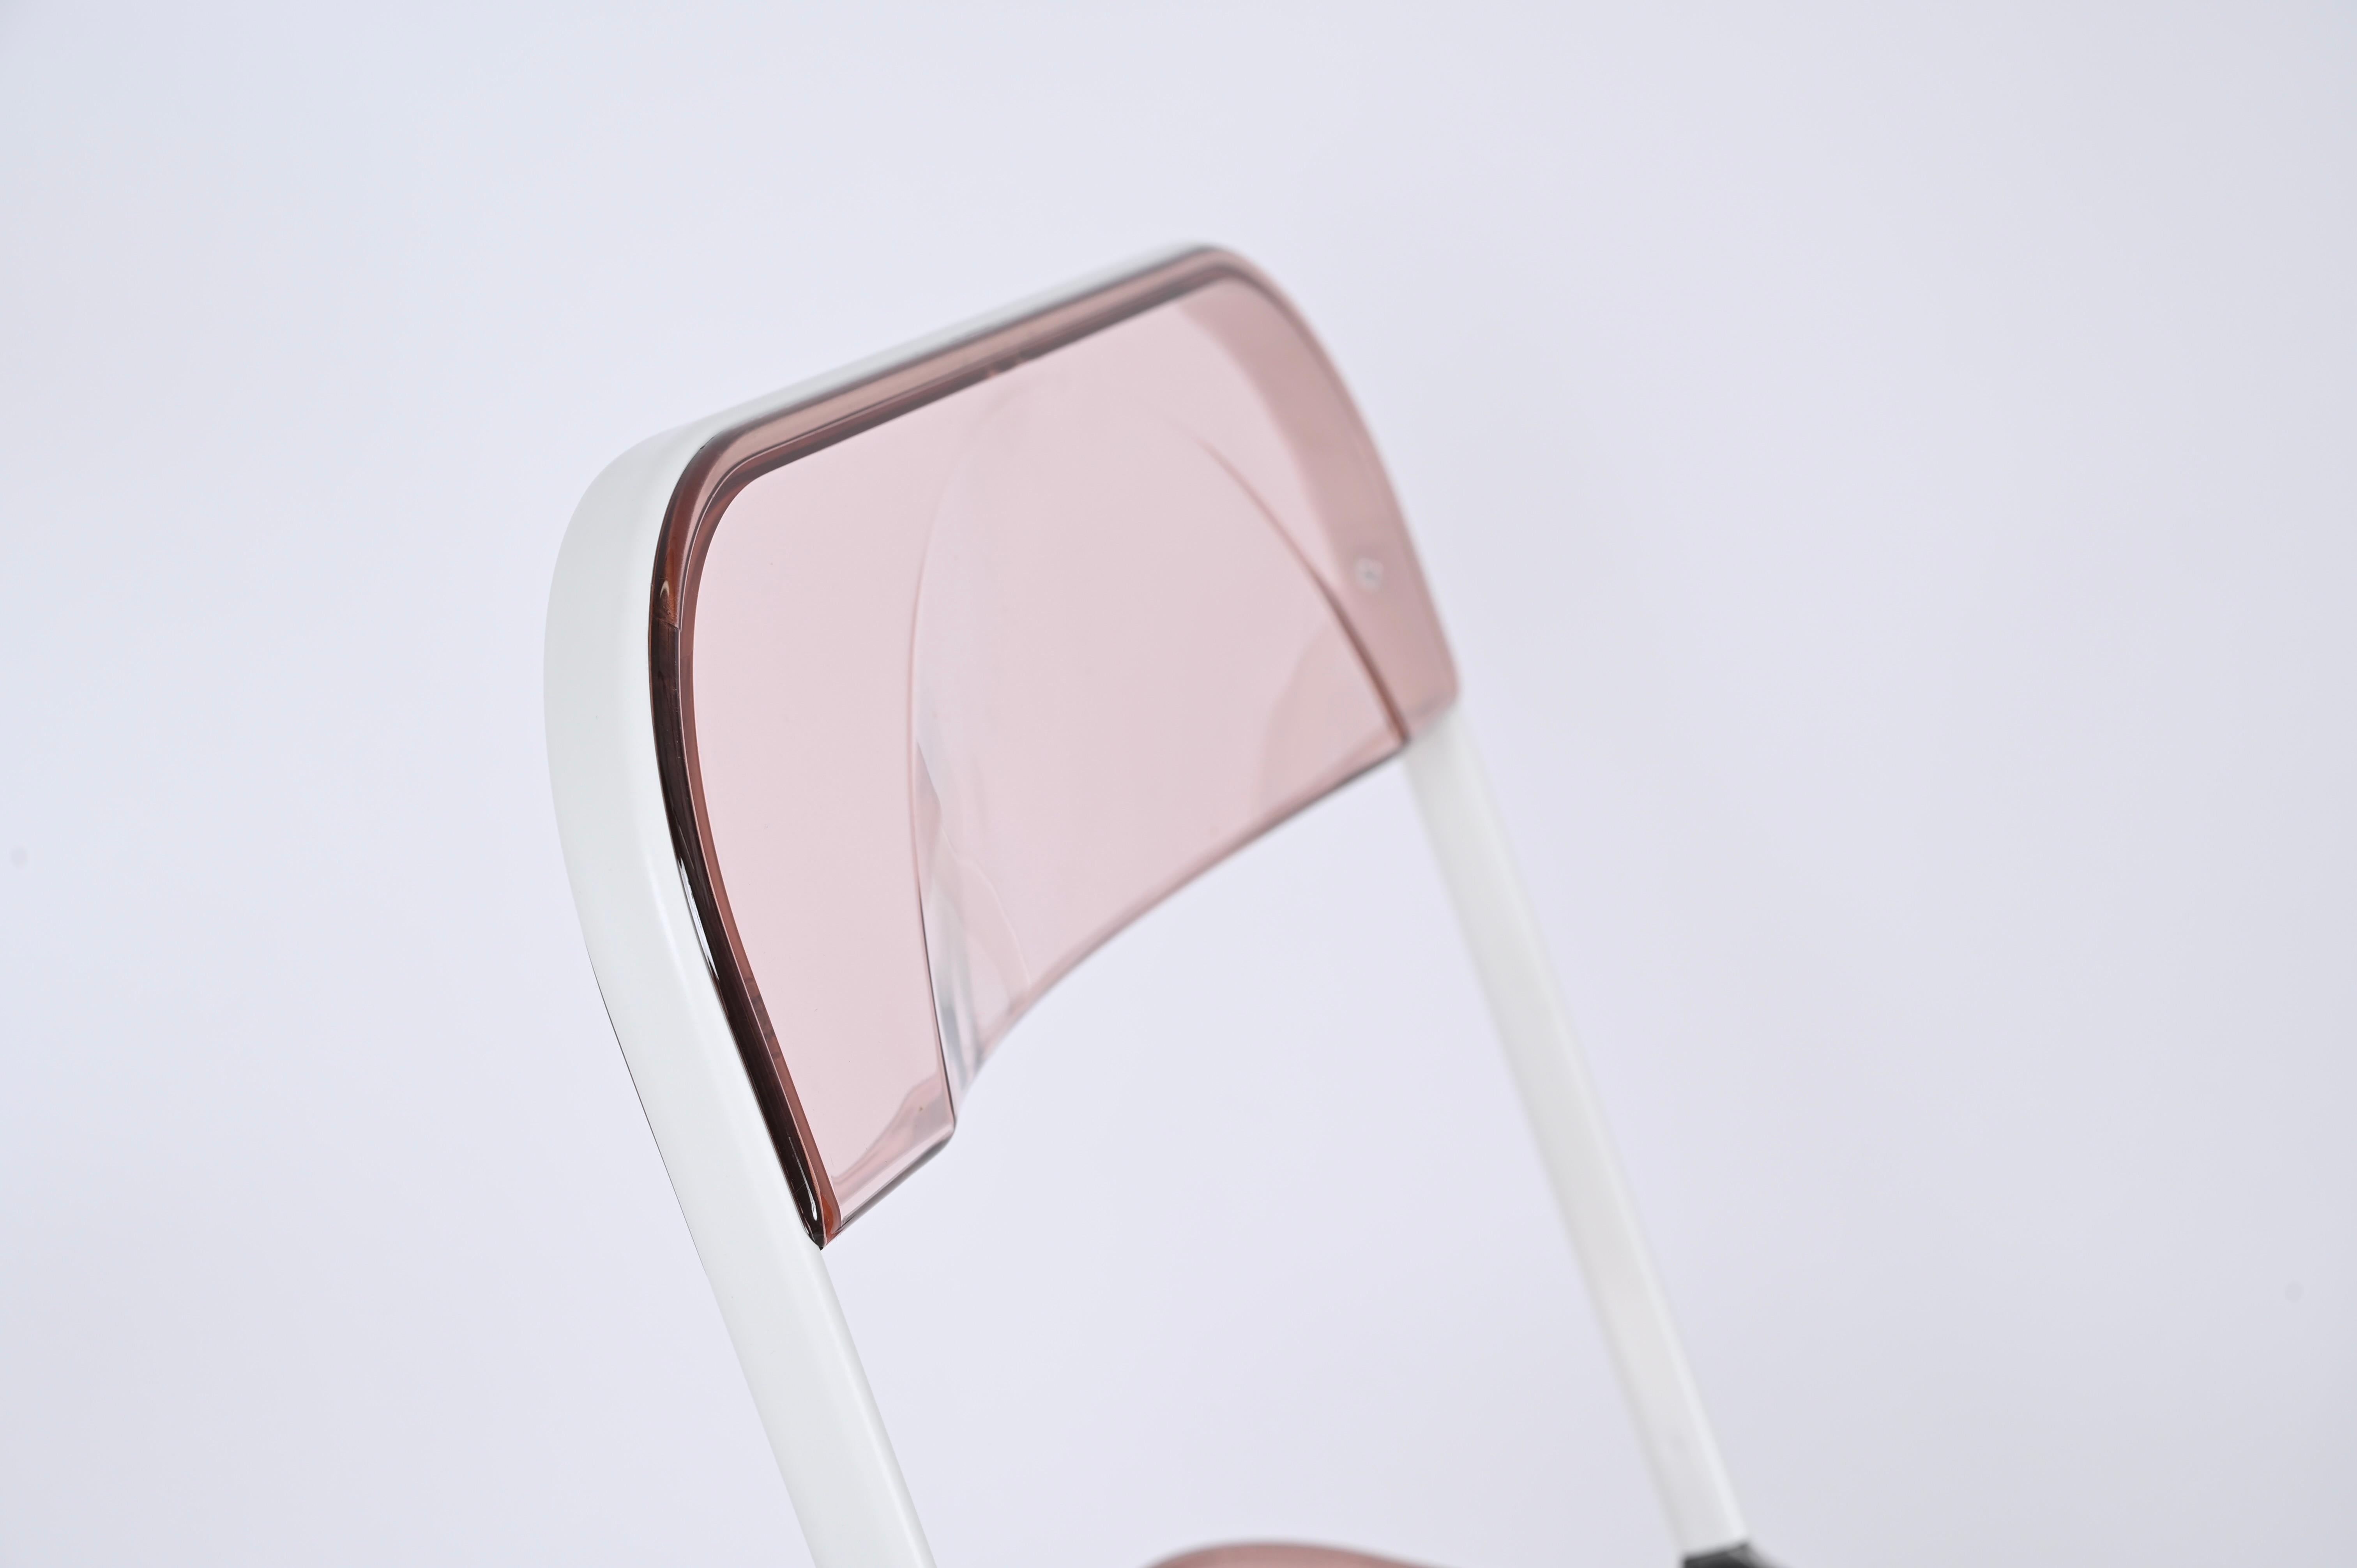 Giancarlo Piretti Lucite Pink and White Folding Plia Chairs for Castelli, 1970s For Sale 2